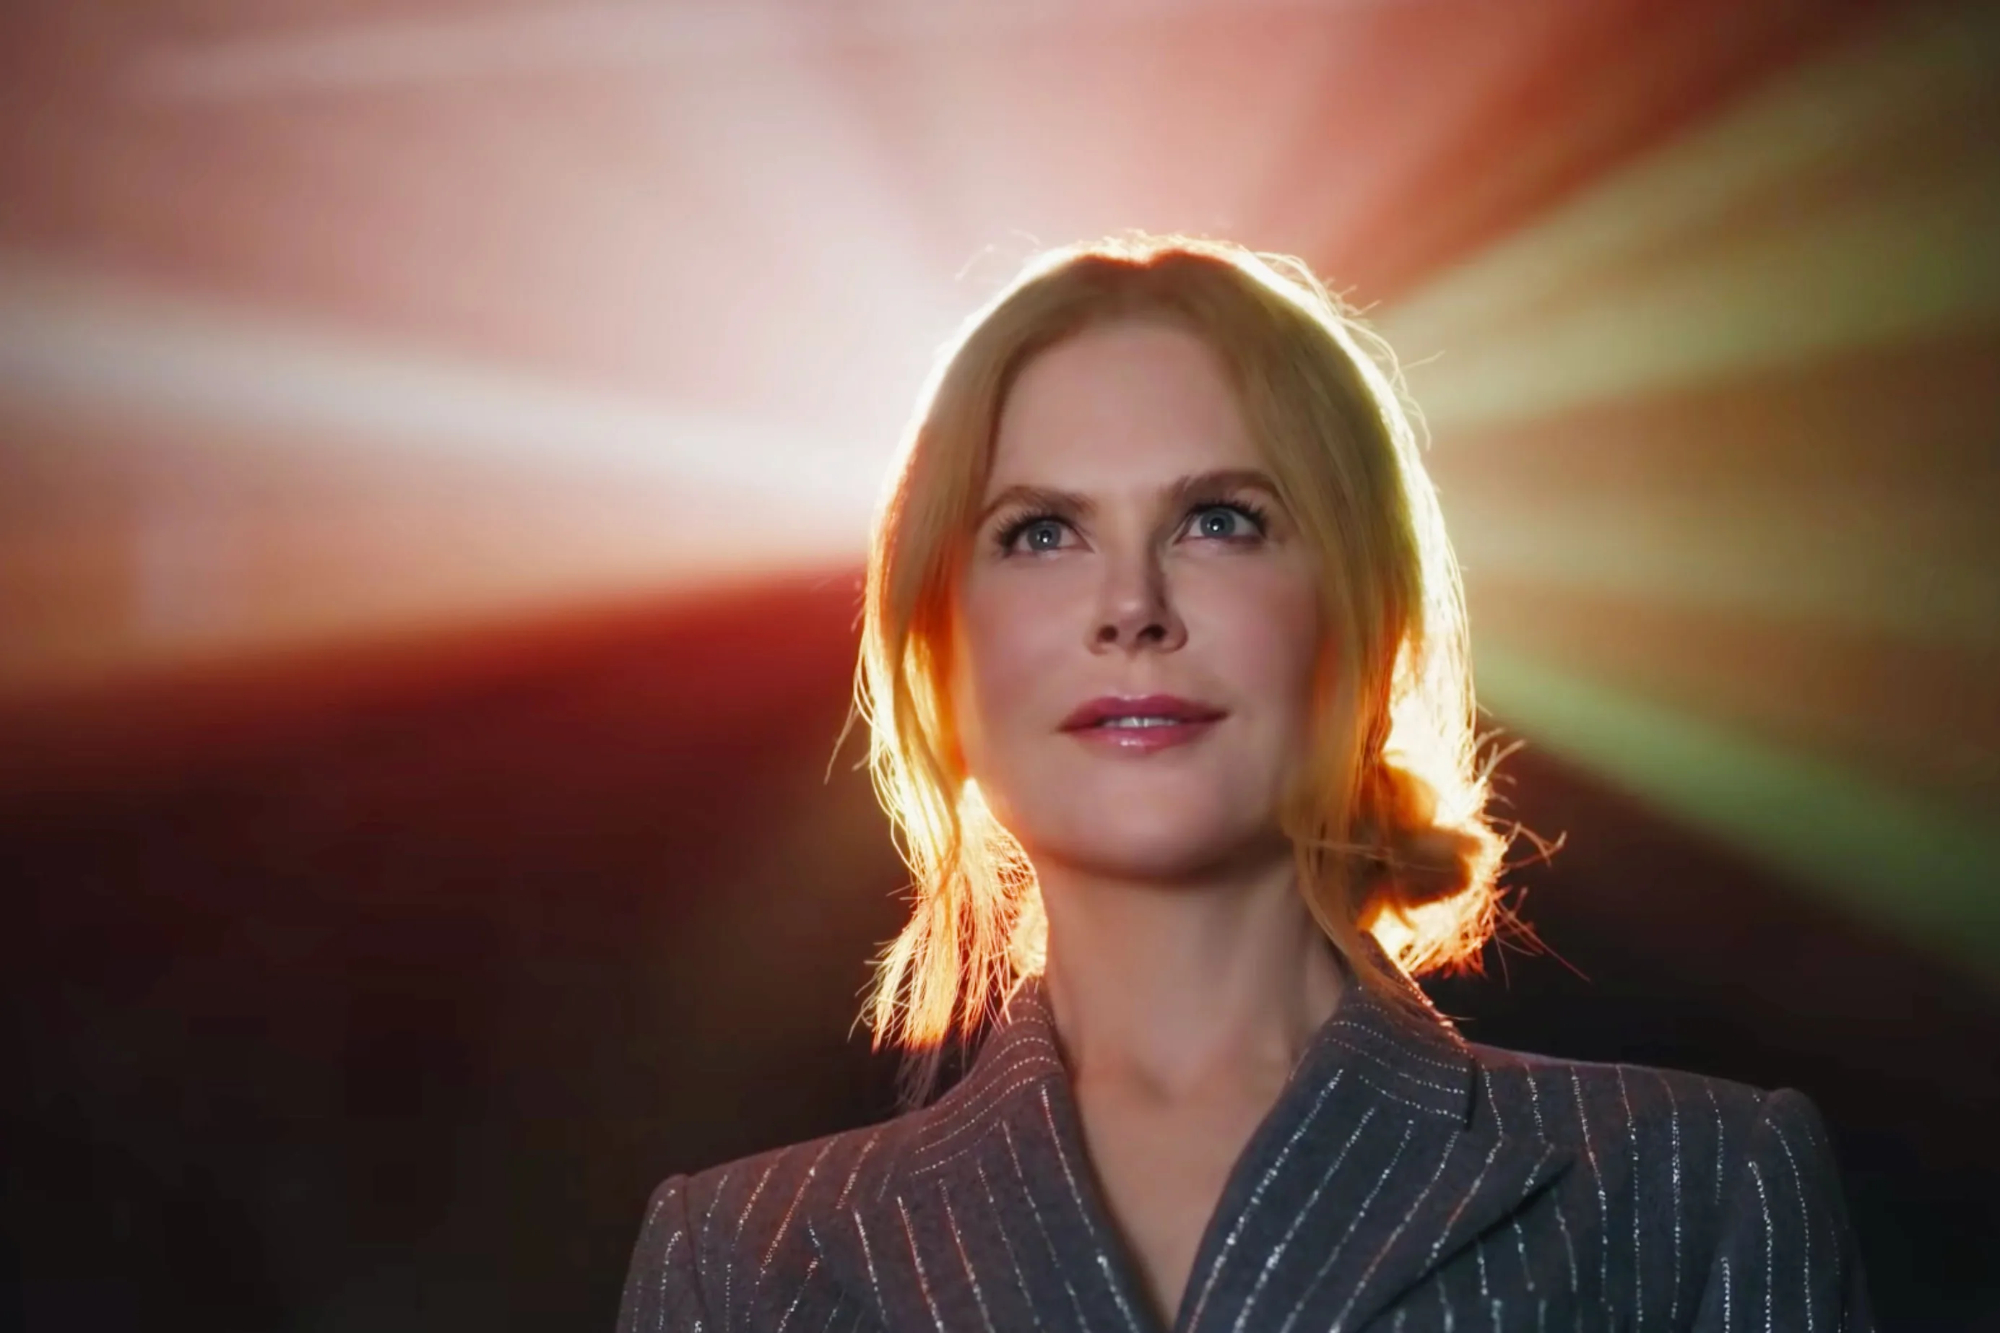 Nicole Kidman in AMC ad looking forward with a smile on her face with the light from the projector behind her